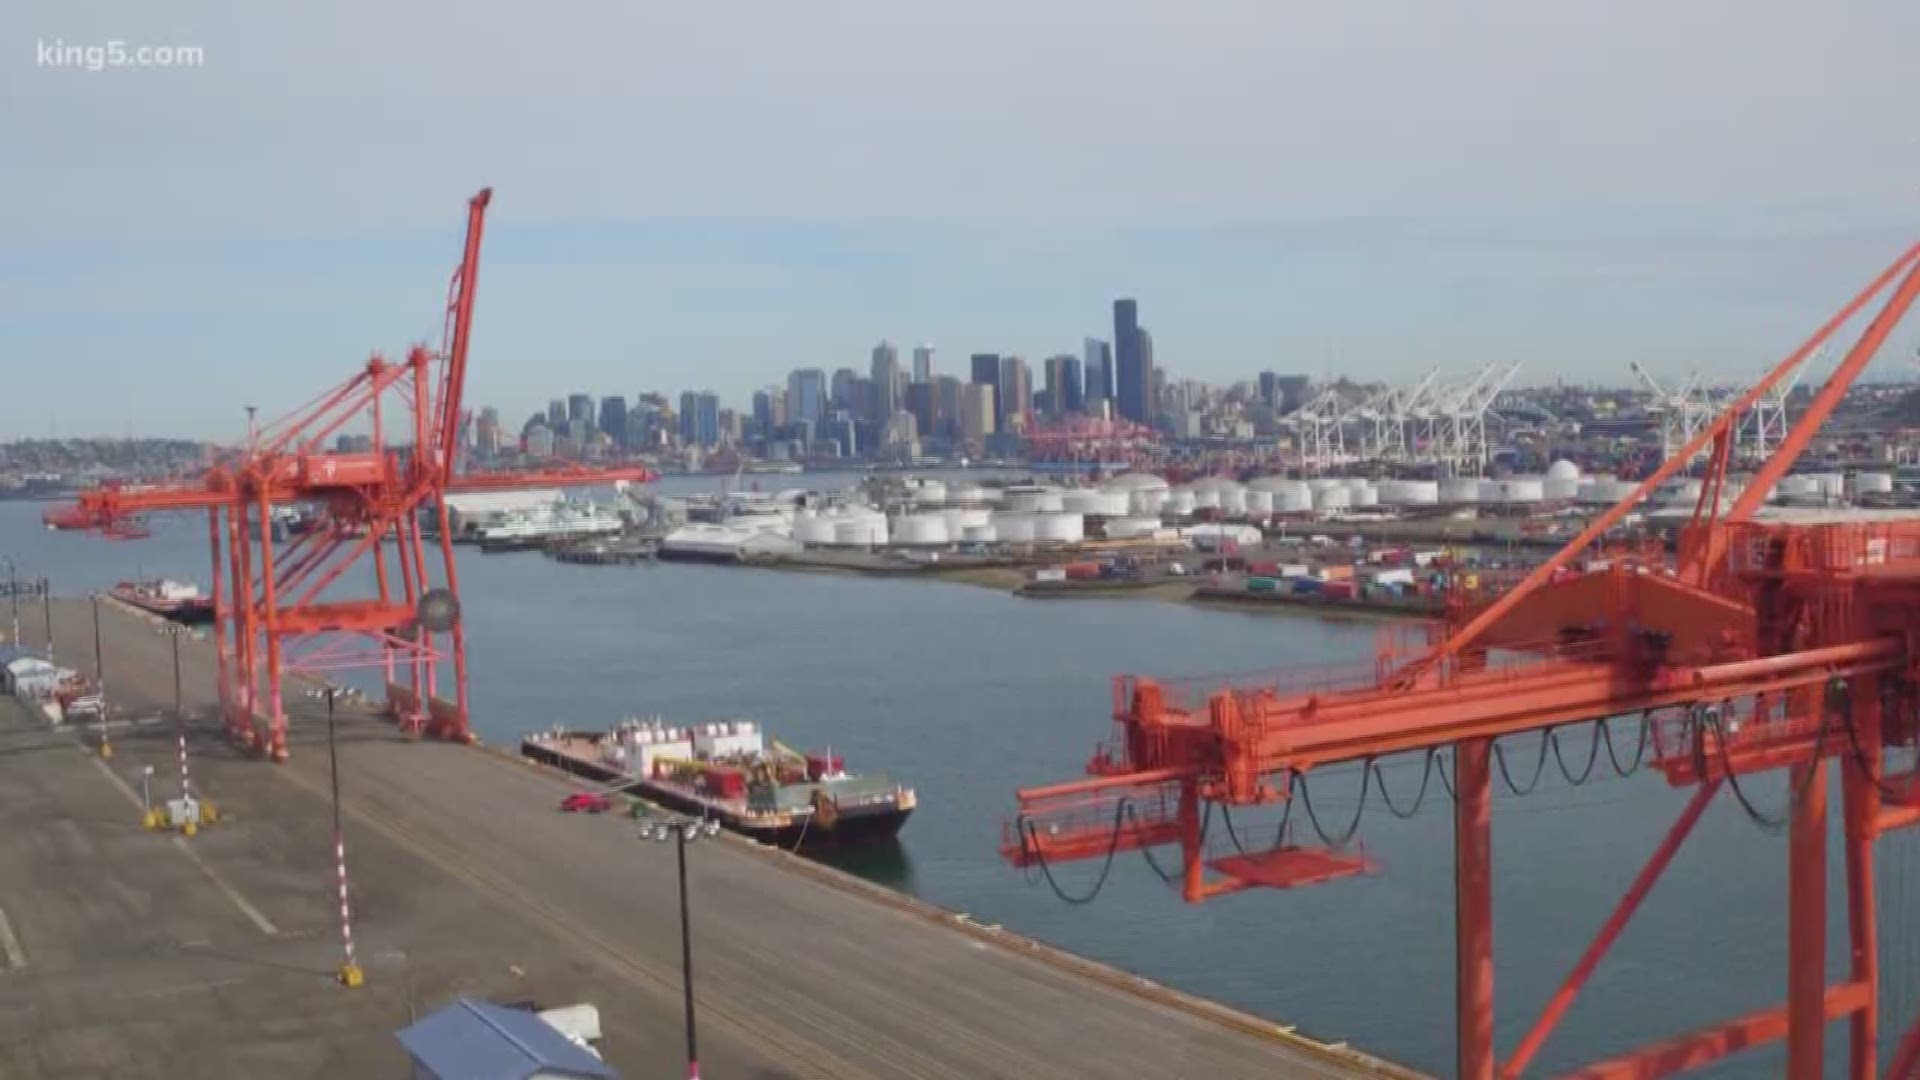 The ongoing trade war with China is having impacts for small businesses in our region. KING 5's Chris Daniels tells us how one company is feeling squeezed by the economic tit-for-tat.